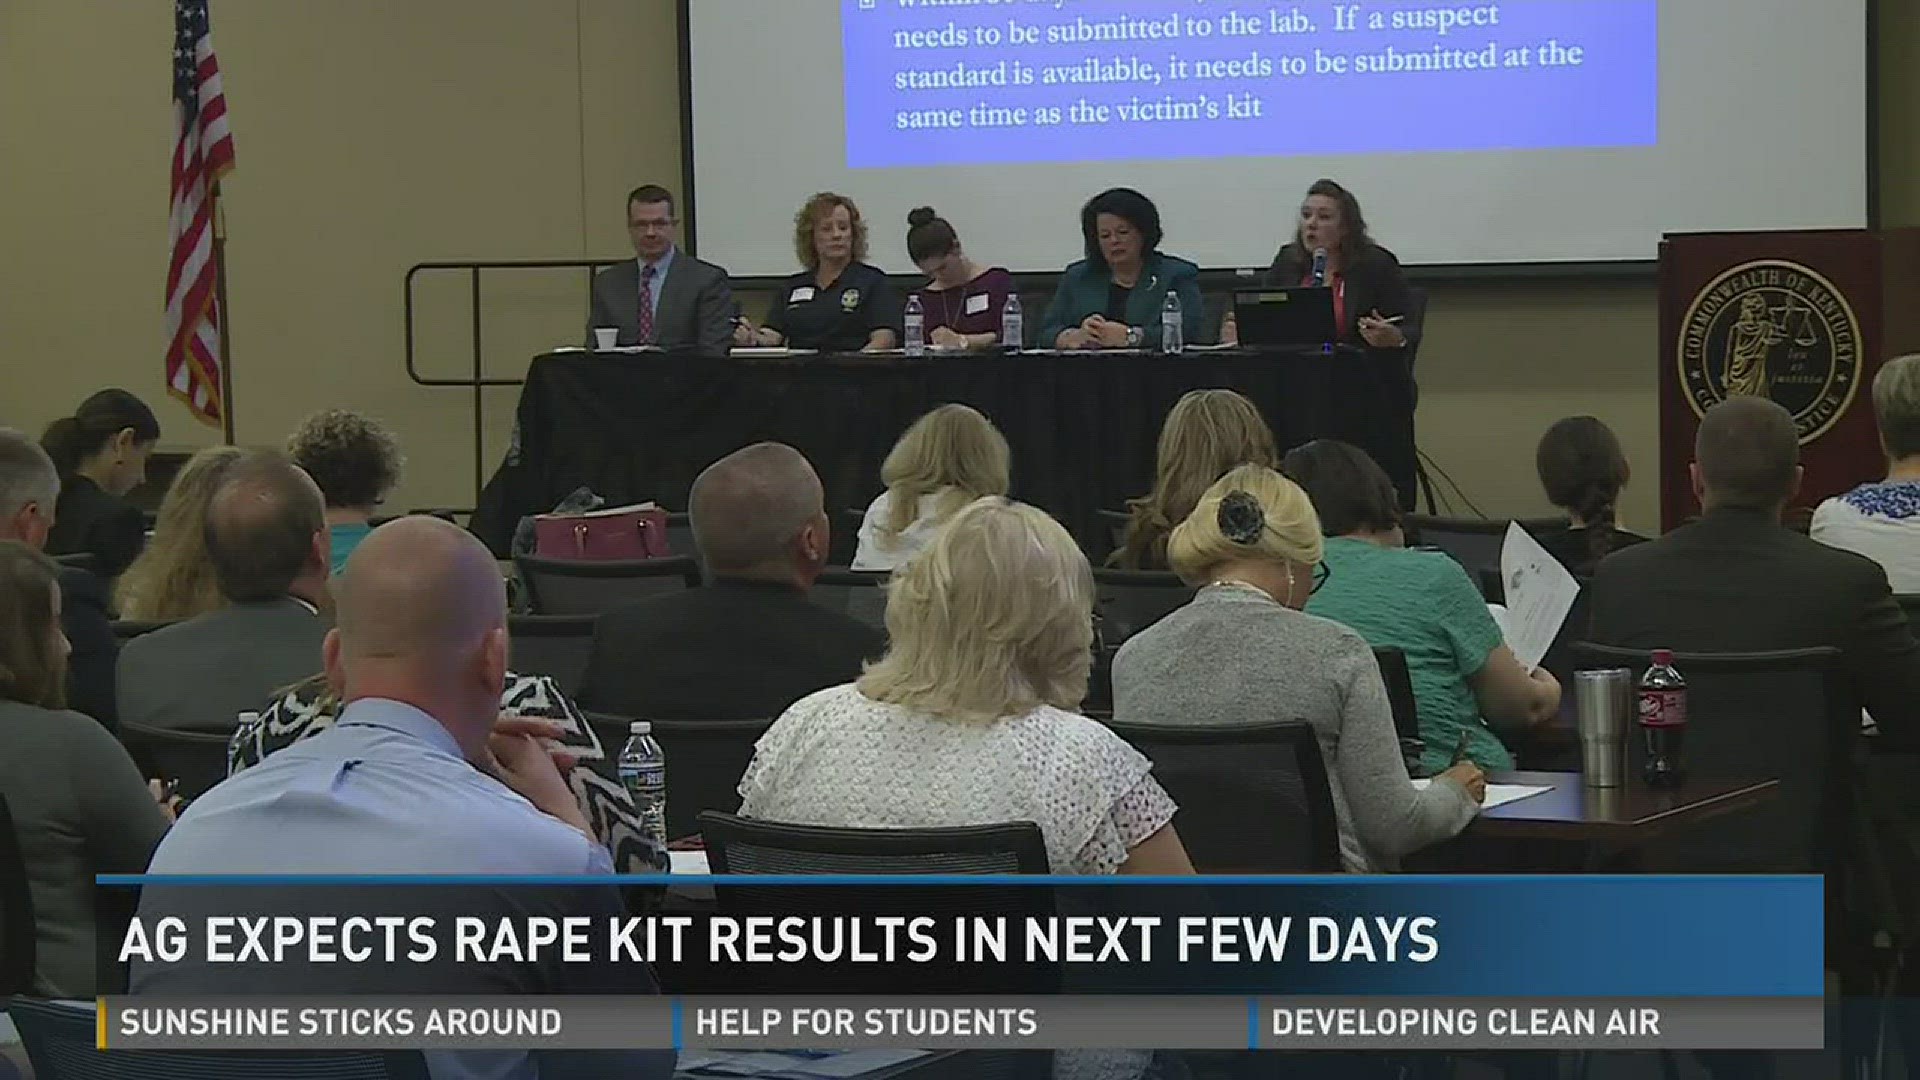 AG expects rape kit results in next few days